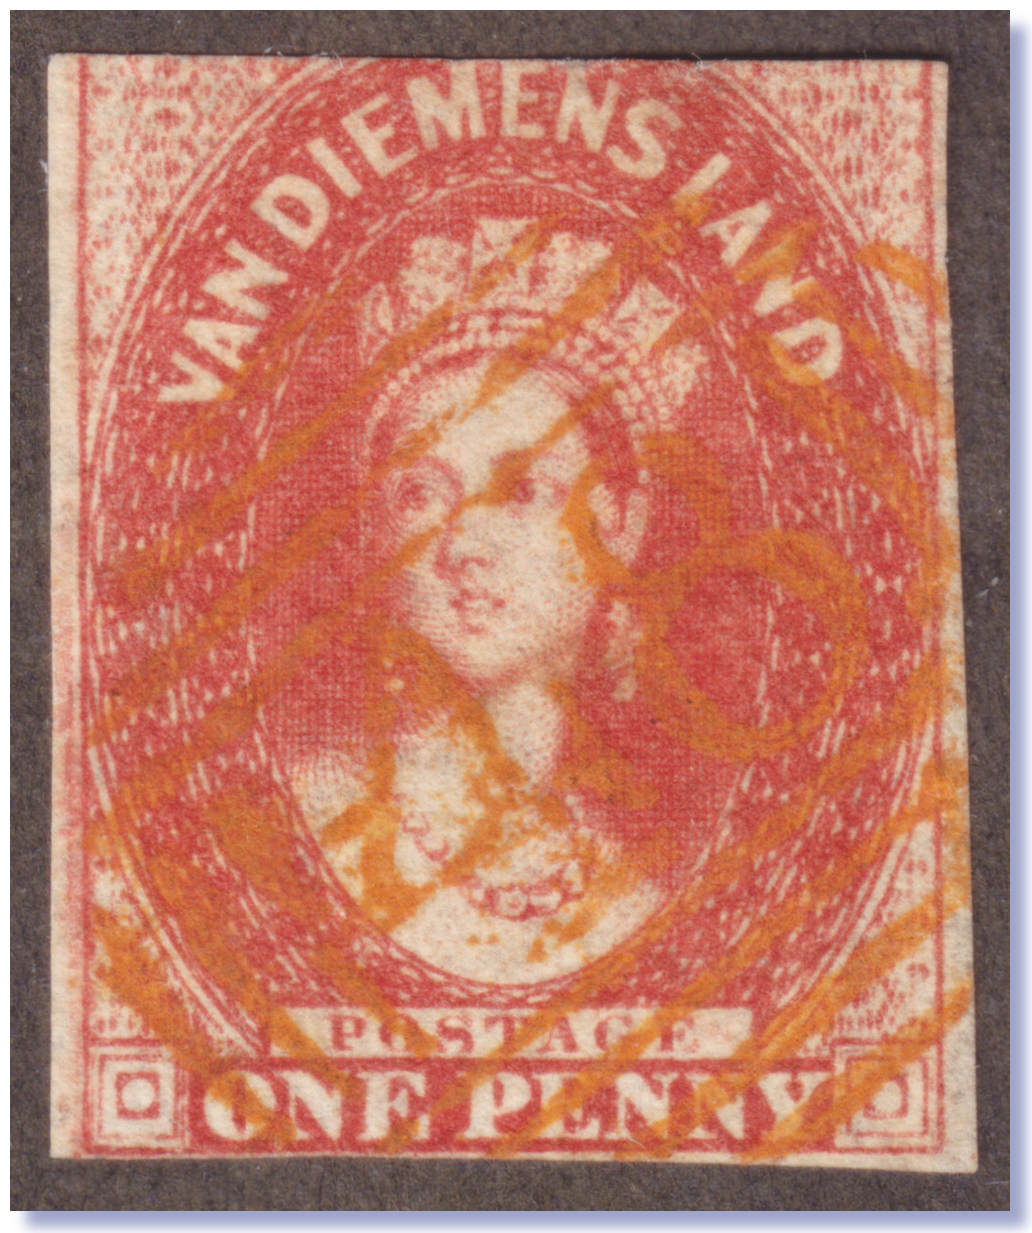 Philatelic Rarities. Rare Postage Stamps and Stamp Collector Investments